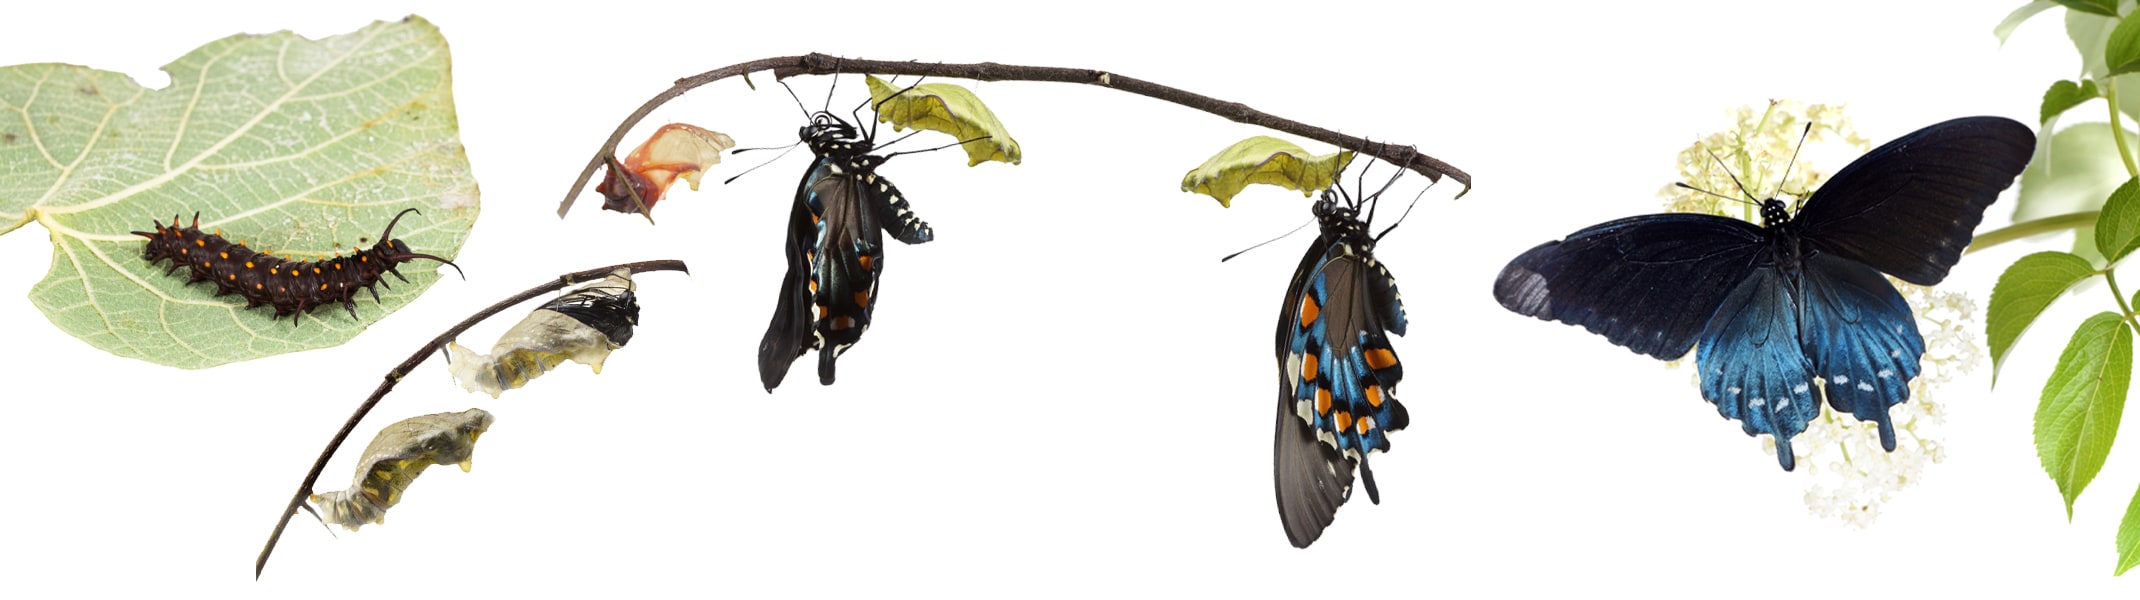 stages of the pipevine butterfly